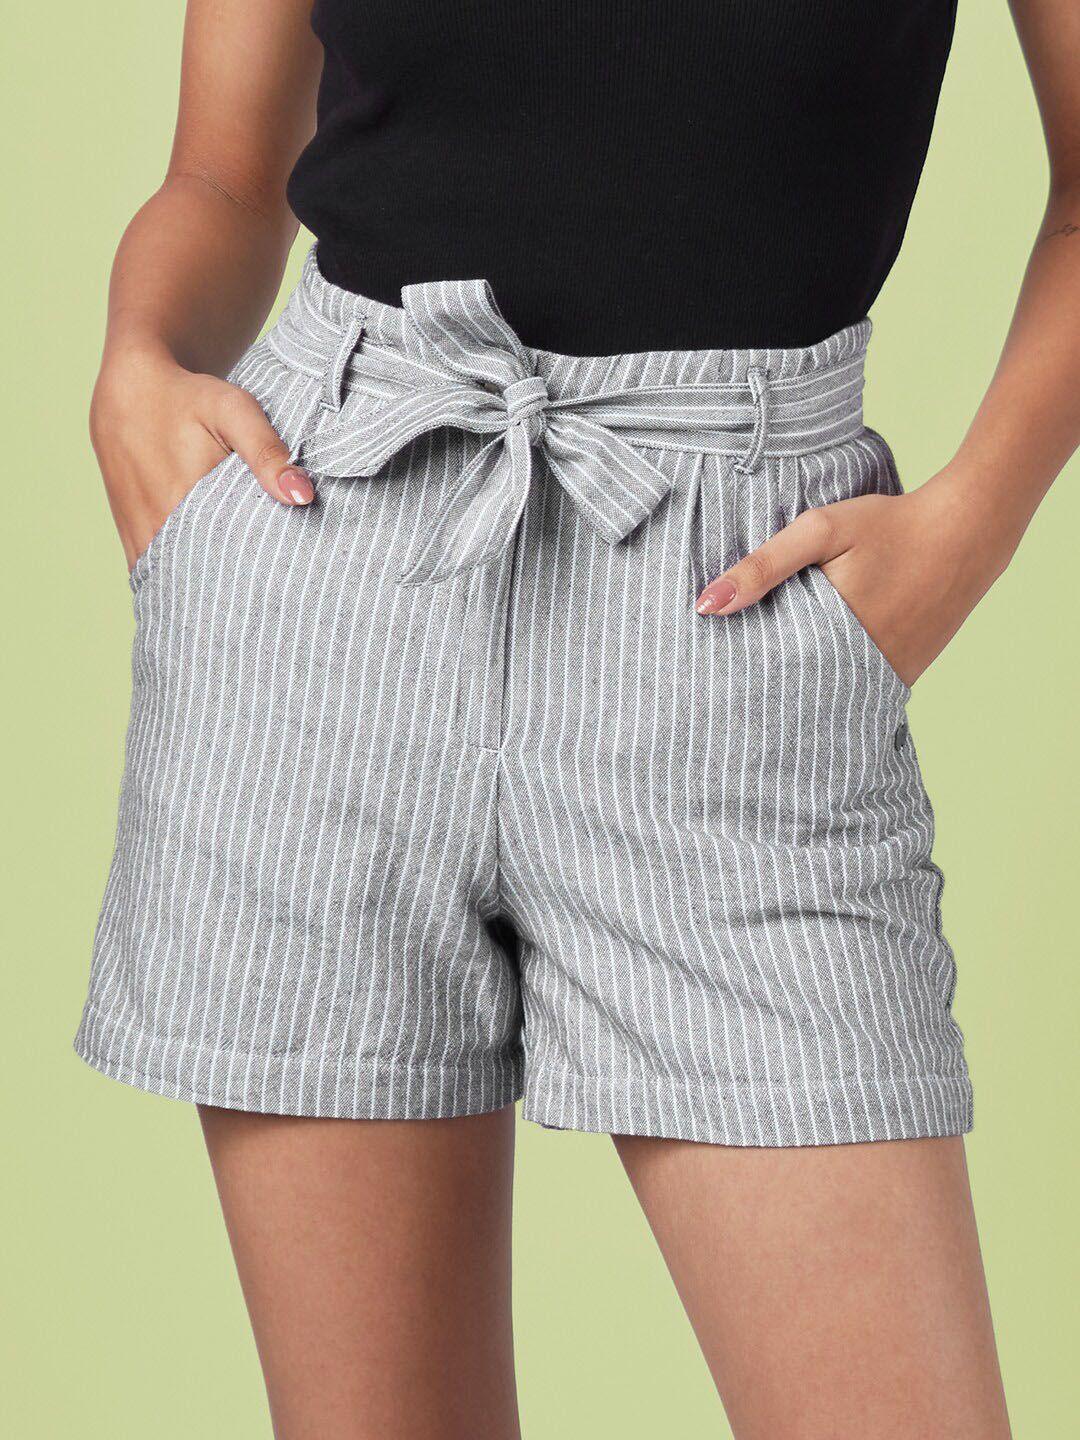 the-souled-store-women-grey-striped-high-rise-outdoor-shorts